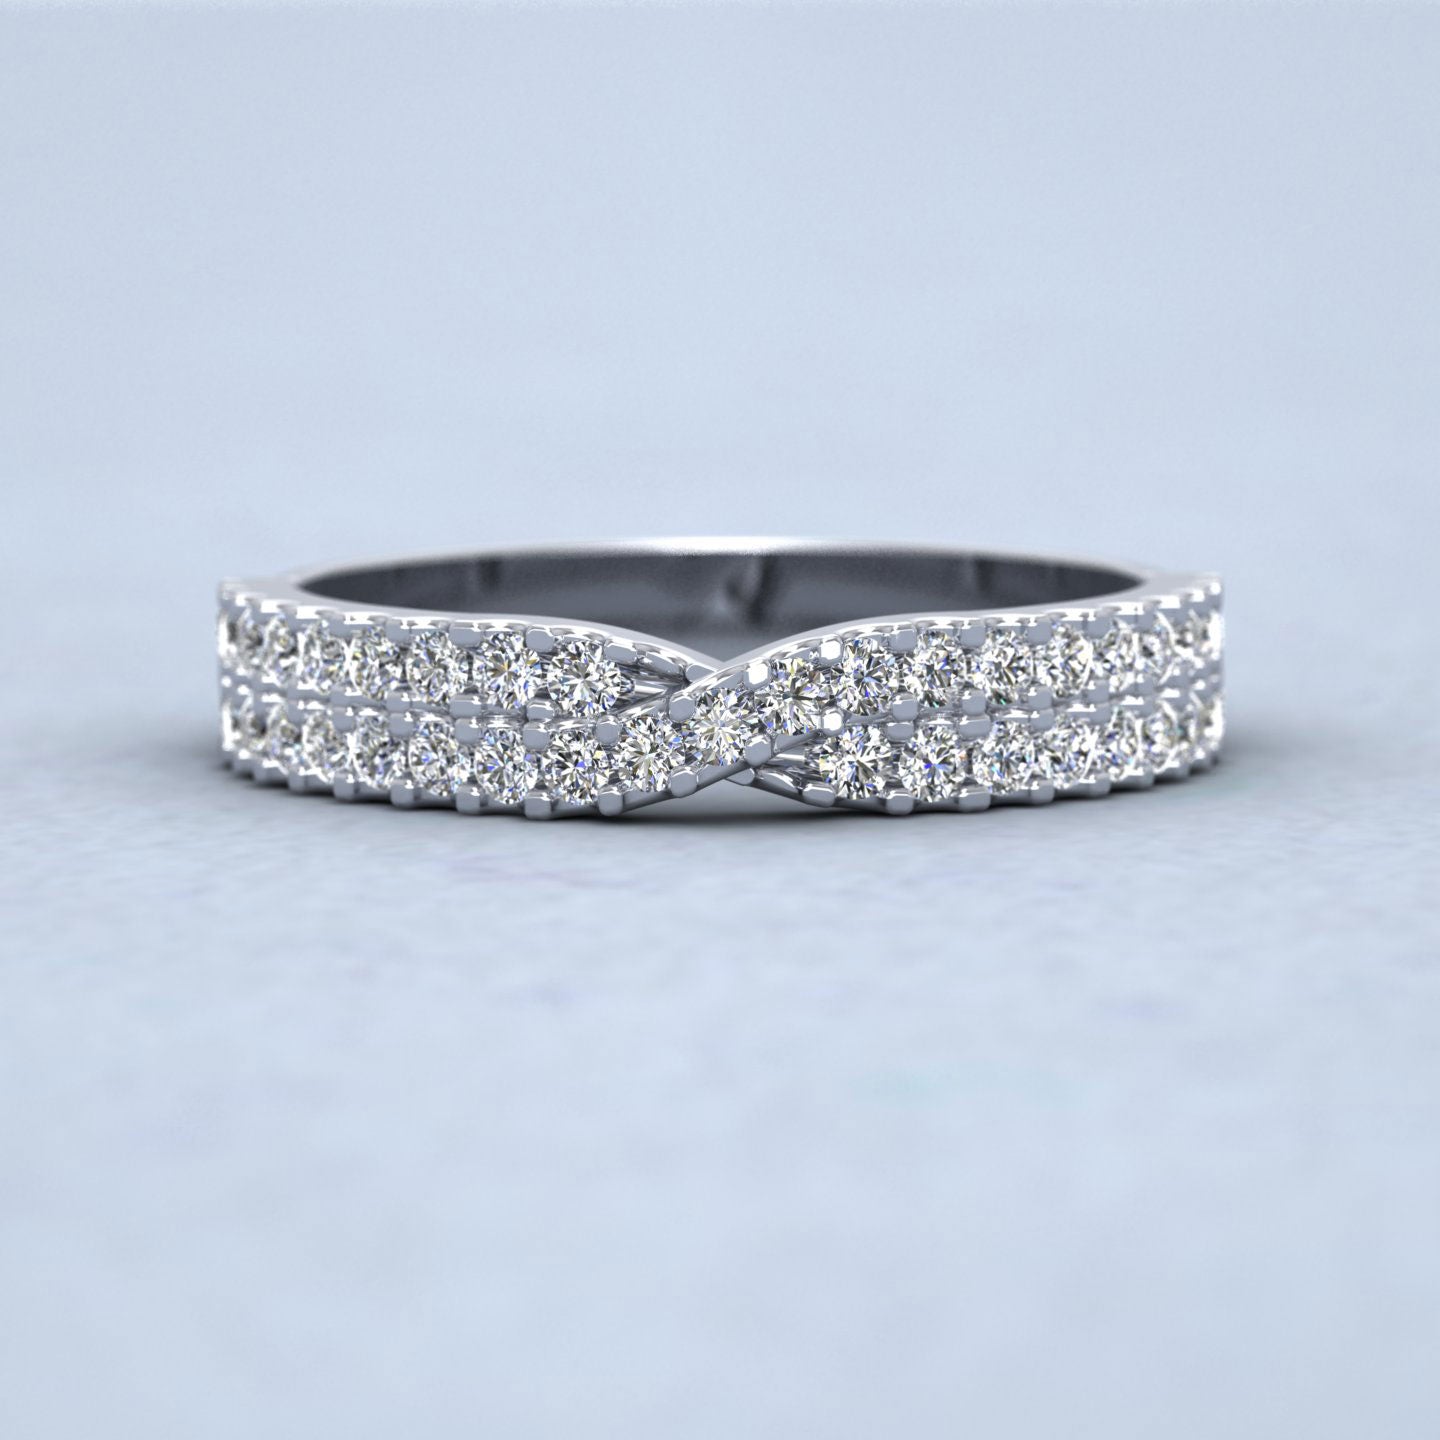 Crossover Diamond Claw Set Wedding Ring In 18ct White Gold 3.5mm Wide